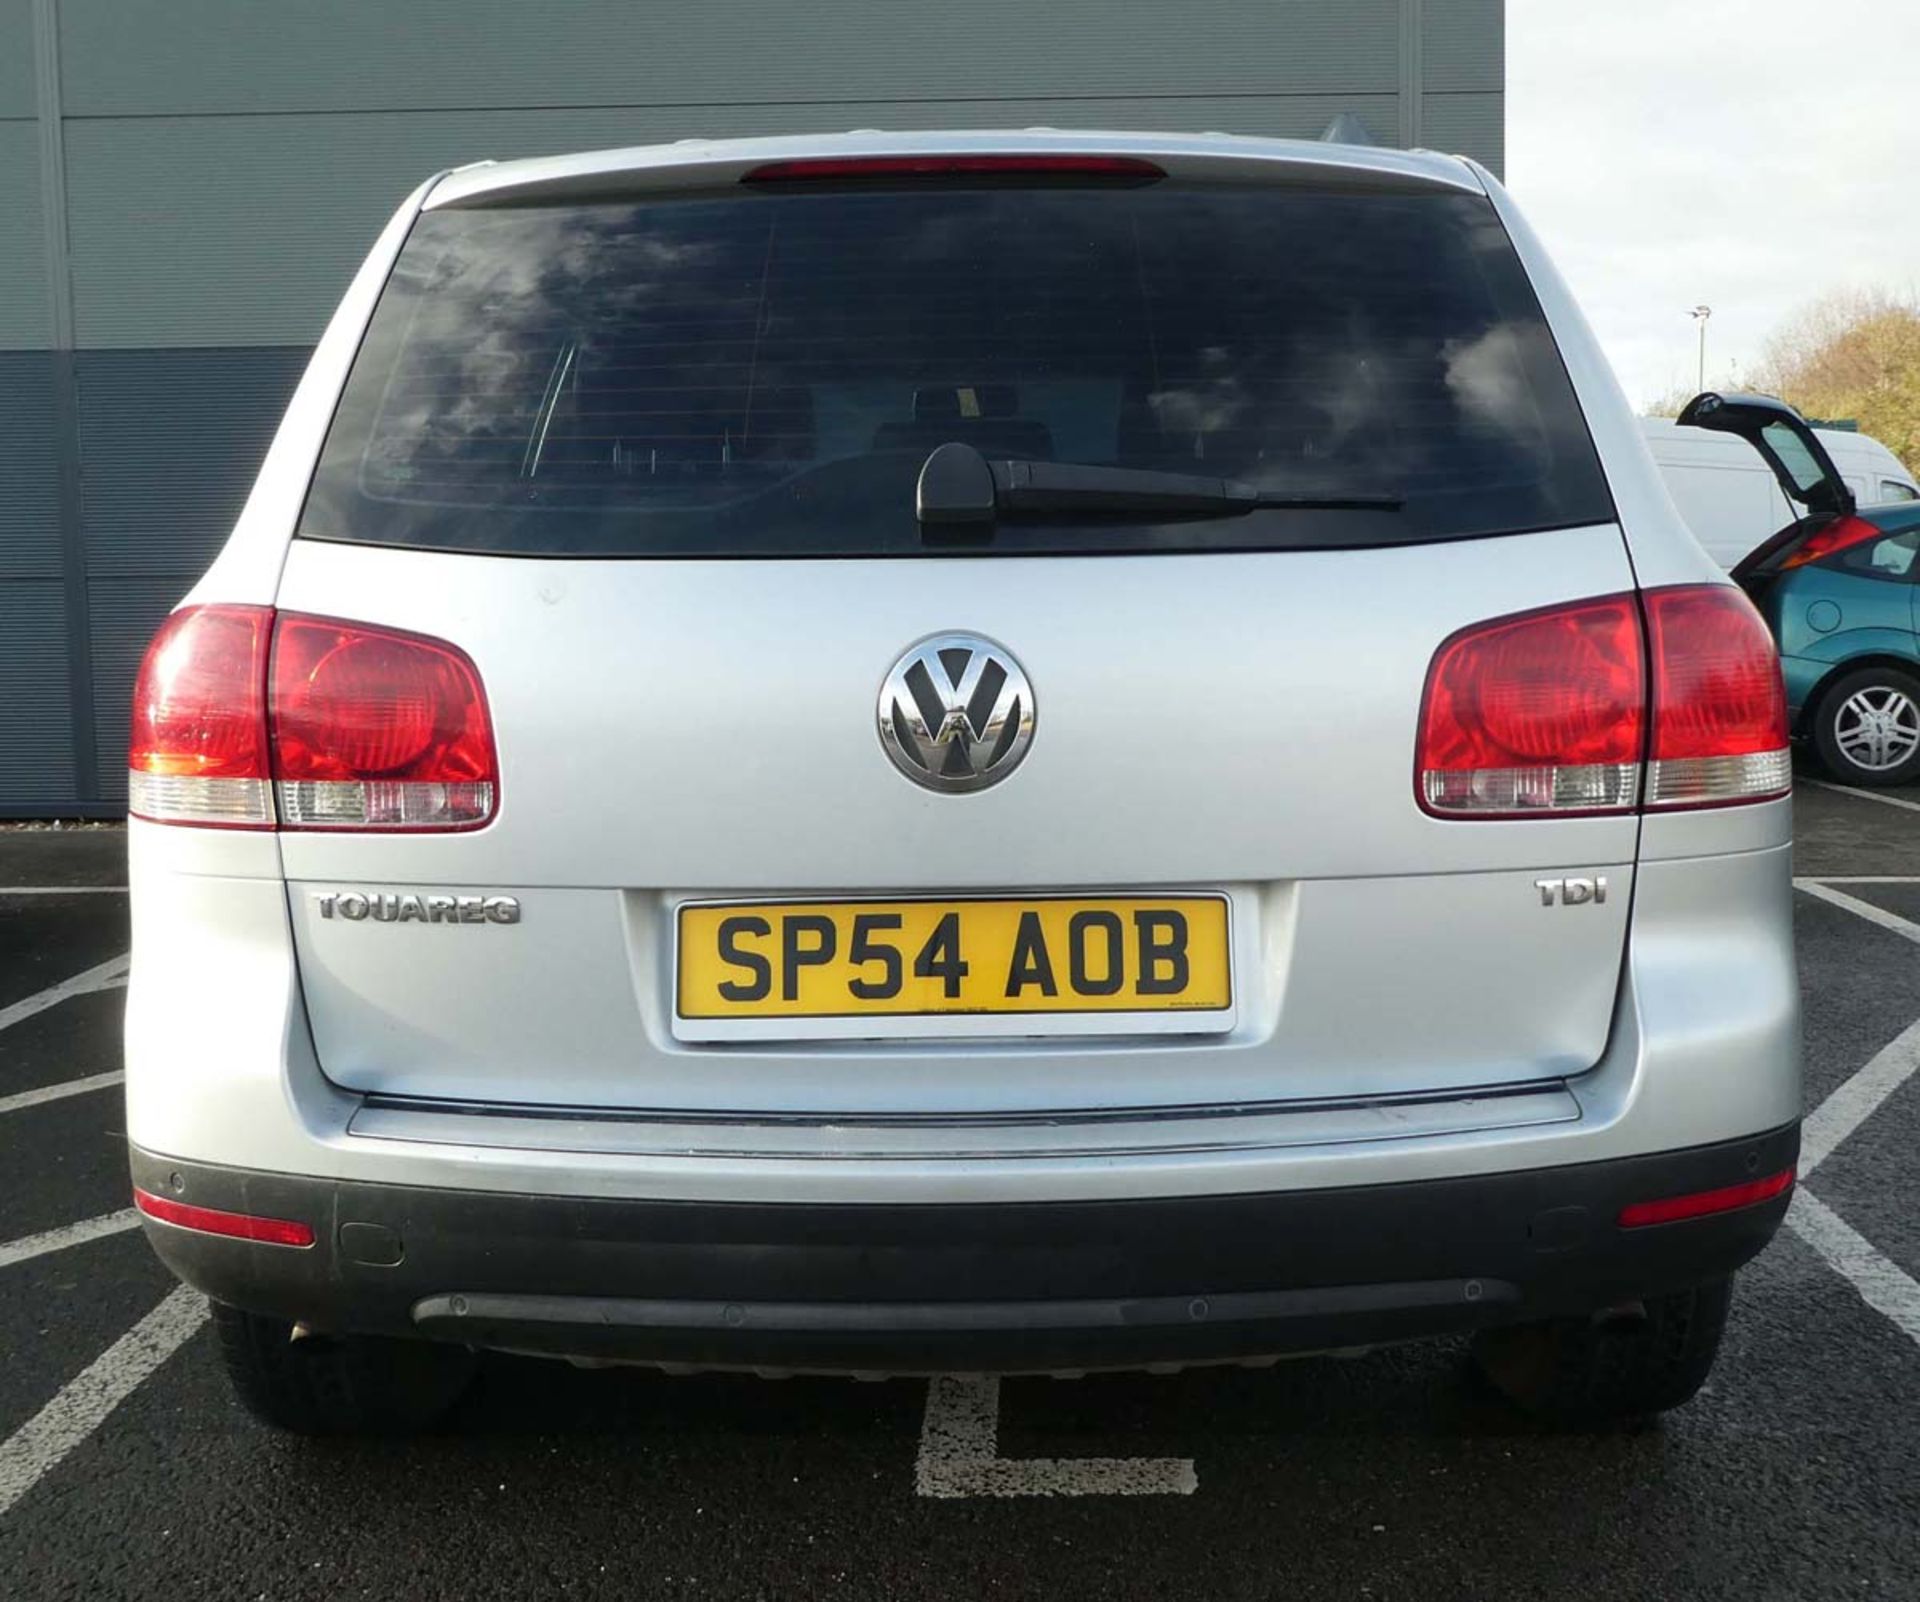 SP54 AOB (2004) Volkswagen Estate Touareg TDI in silver, 2461cc, diesel, 3 former keepers, 1 key, - Image 4 of 12